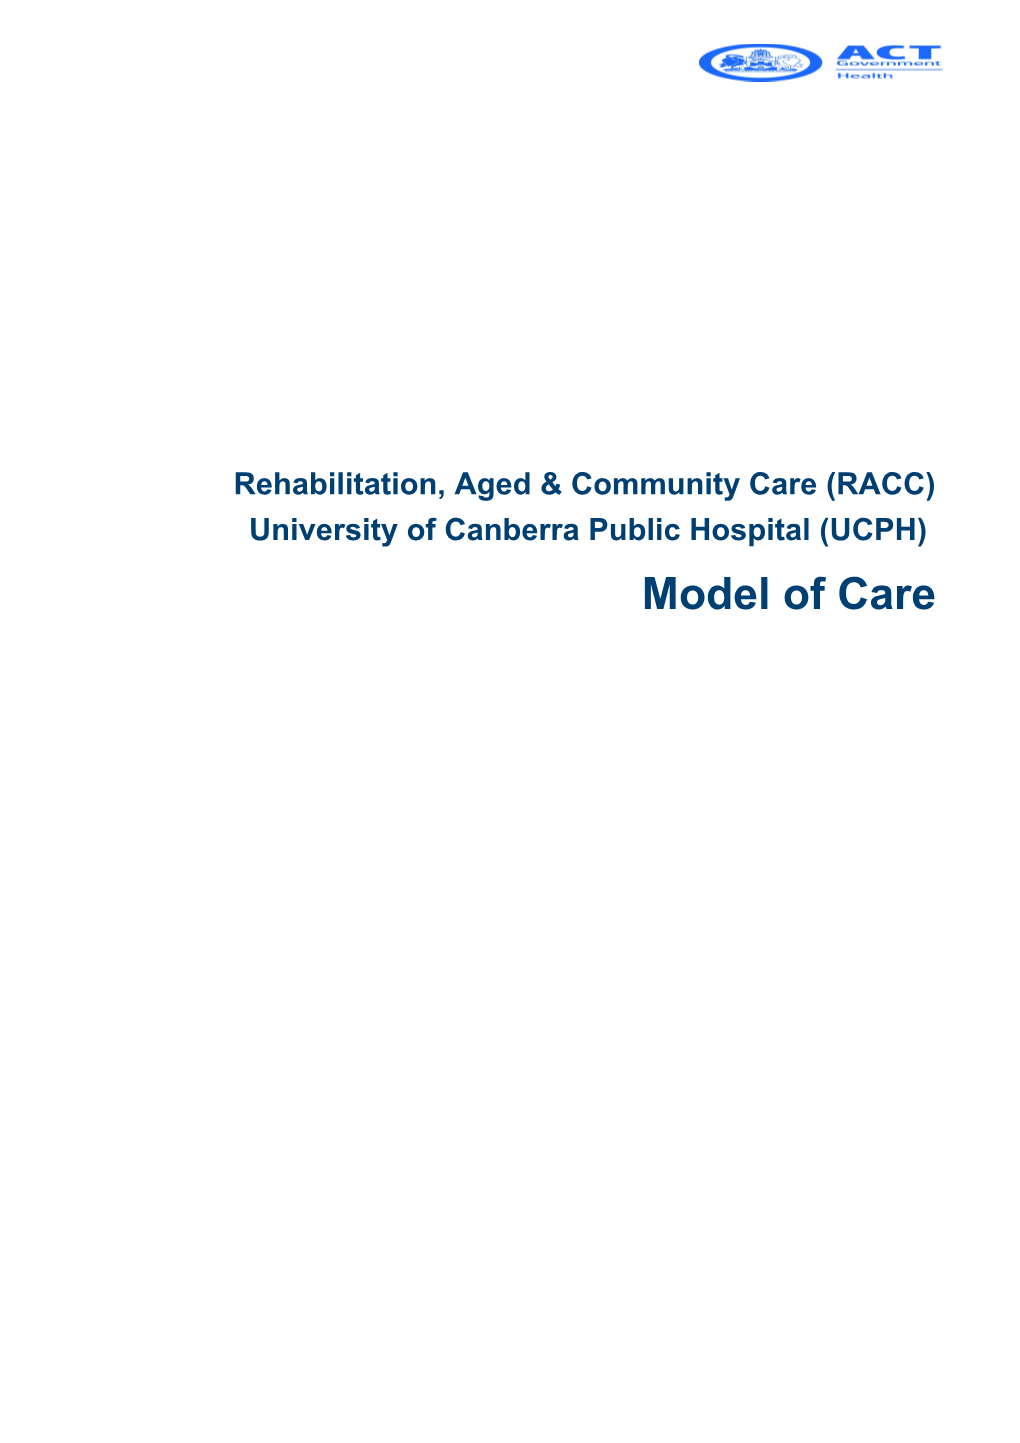 2 Profile of Current RACC Activities 12